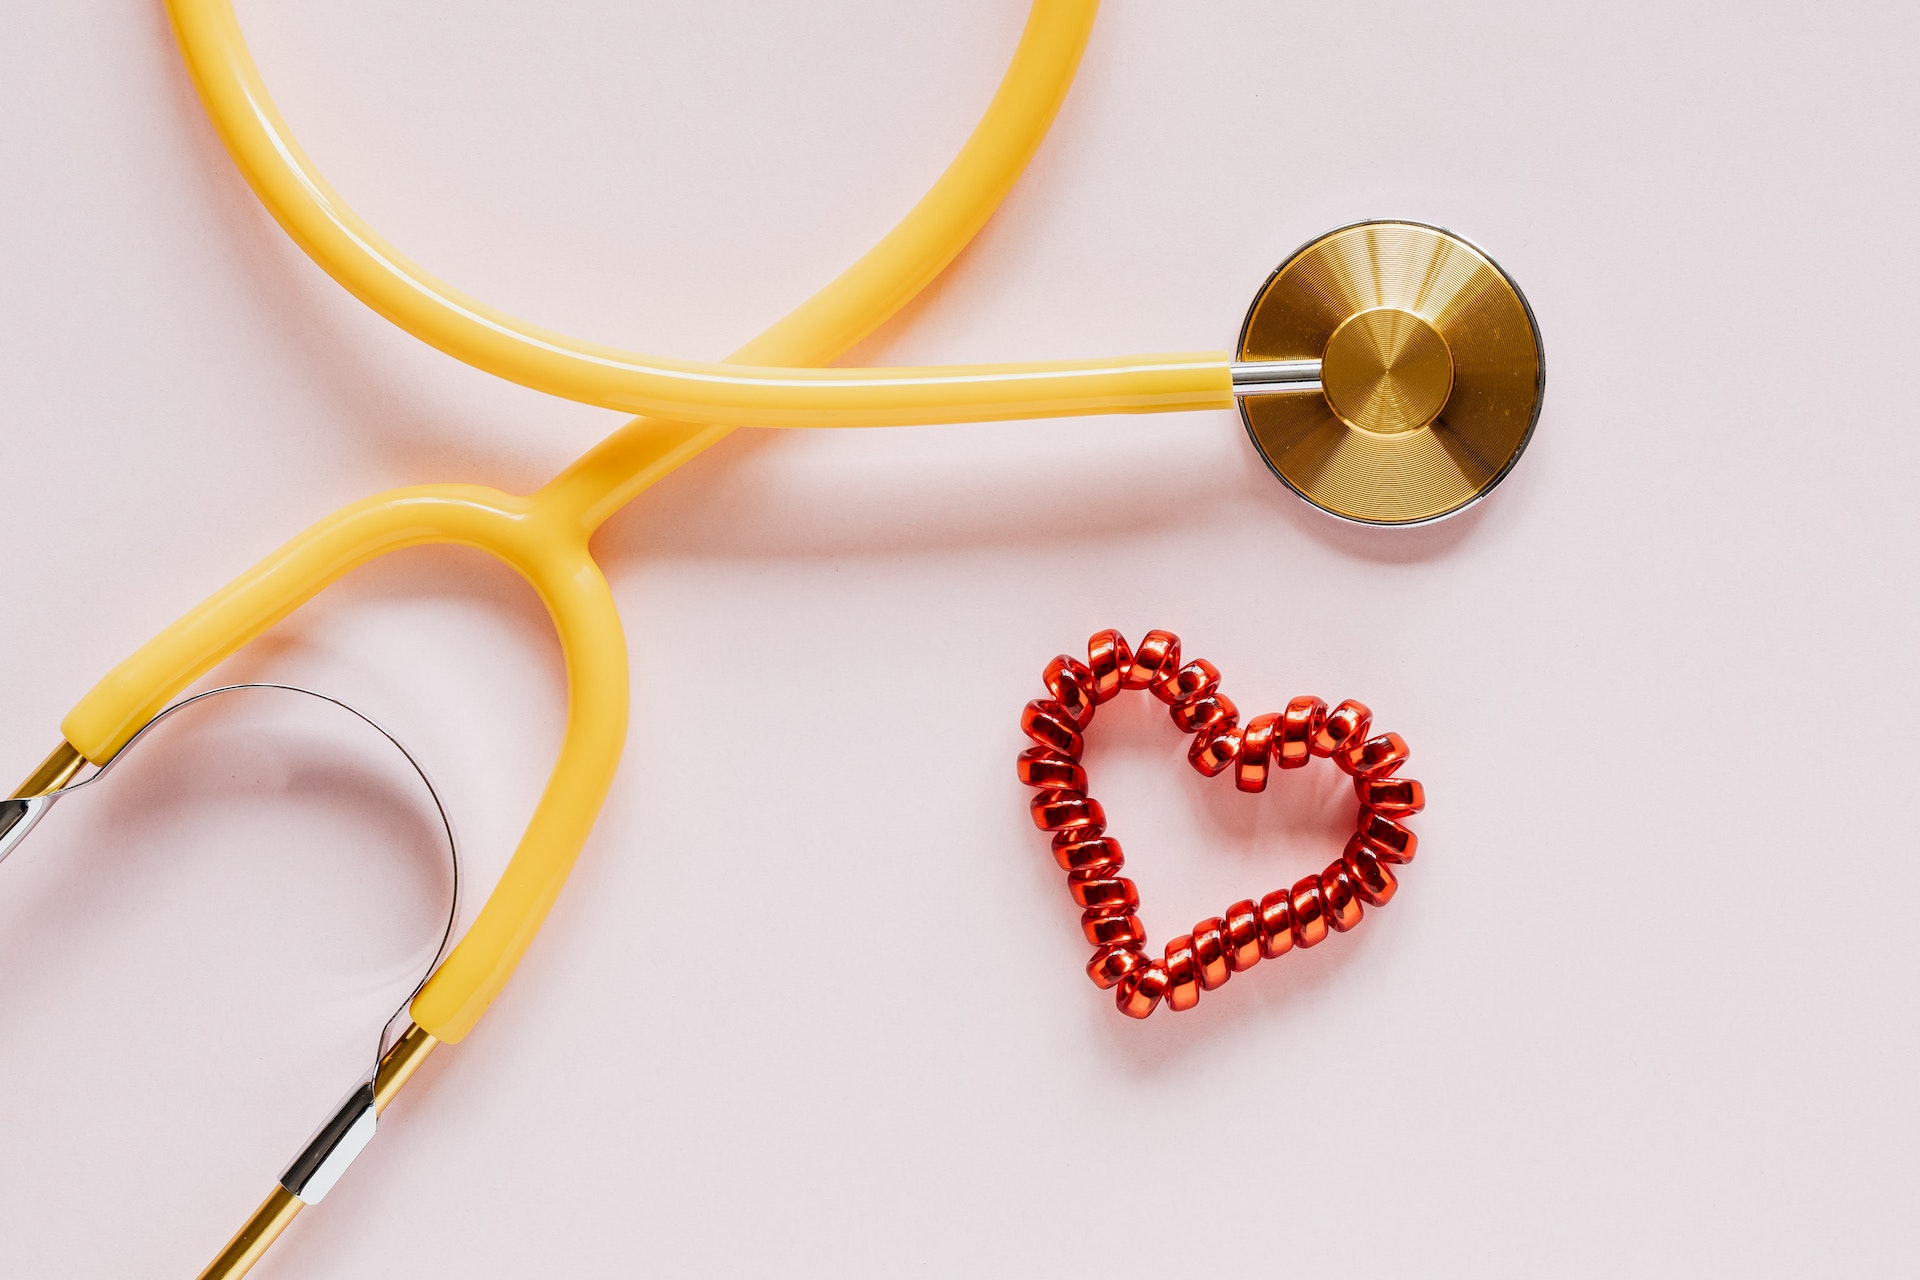 a stethoscope with a paper heart next to it